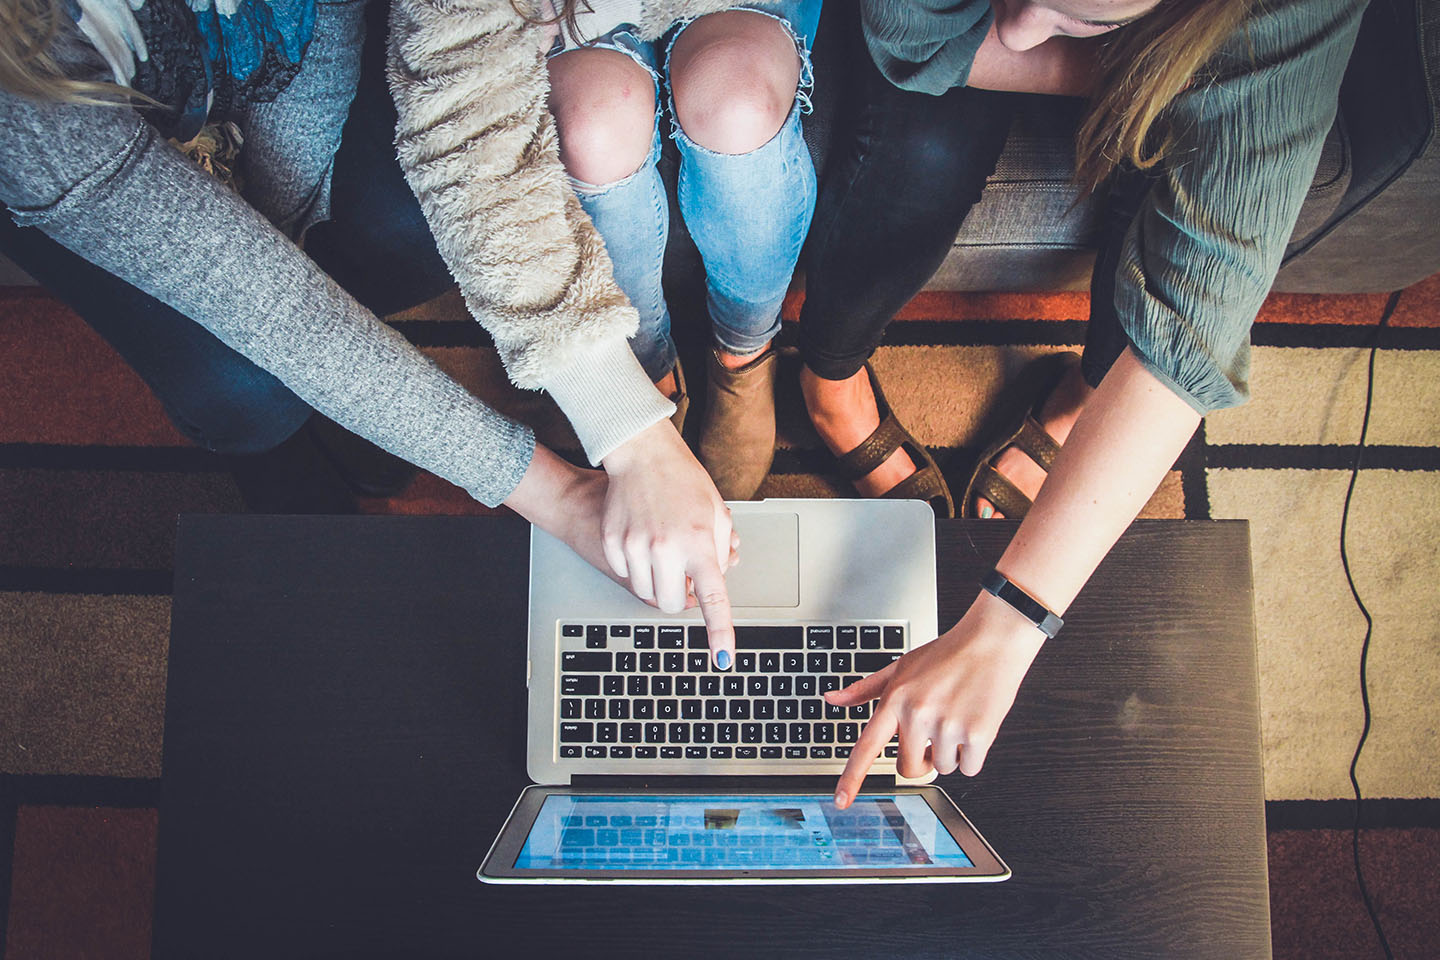 Three co-workers working together on the same screen. Feature photo by John Schnobrich on Unsplash.